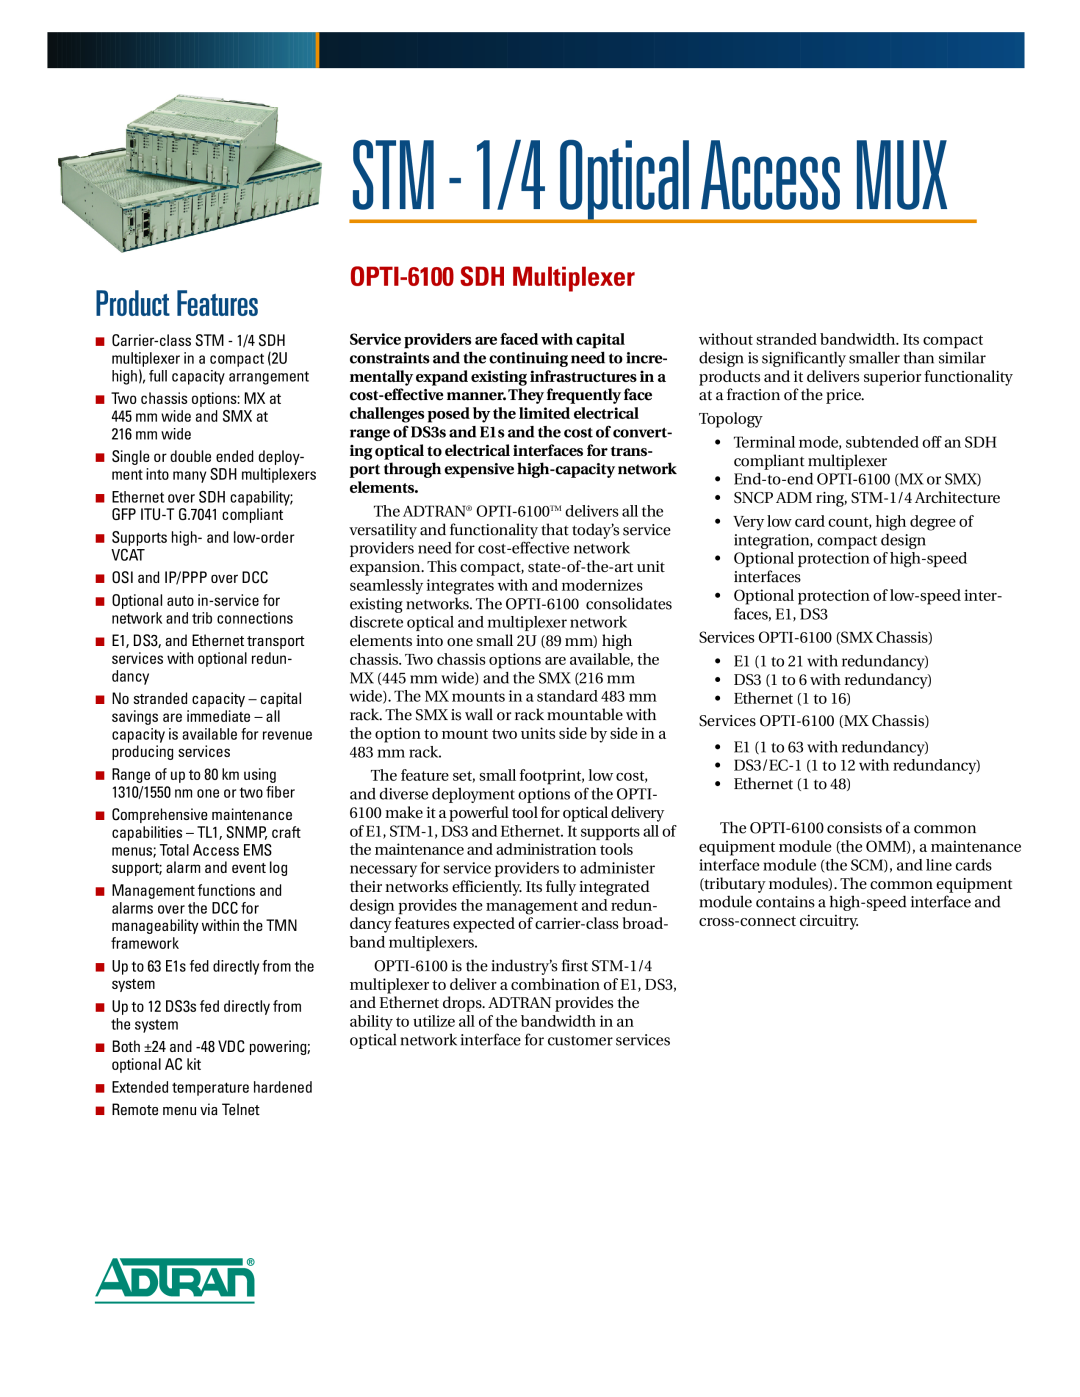 ADTRAN manual OPTI-6100 SDH Multiplexer, STM - 1/4 Optical Access MUX, OPTI-6100 is the industry’s first STM-1/4 